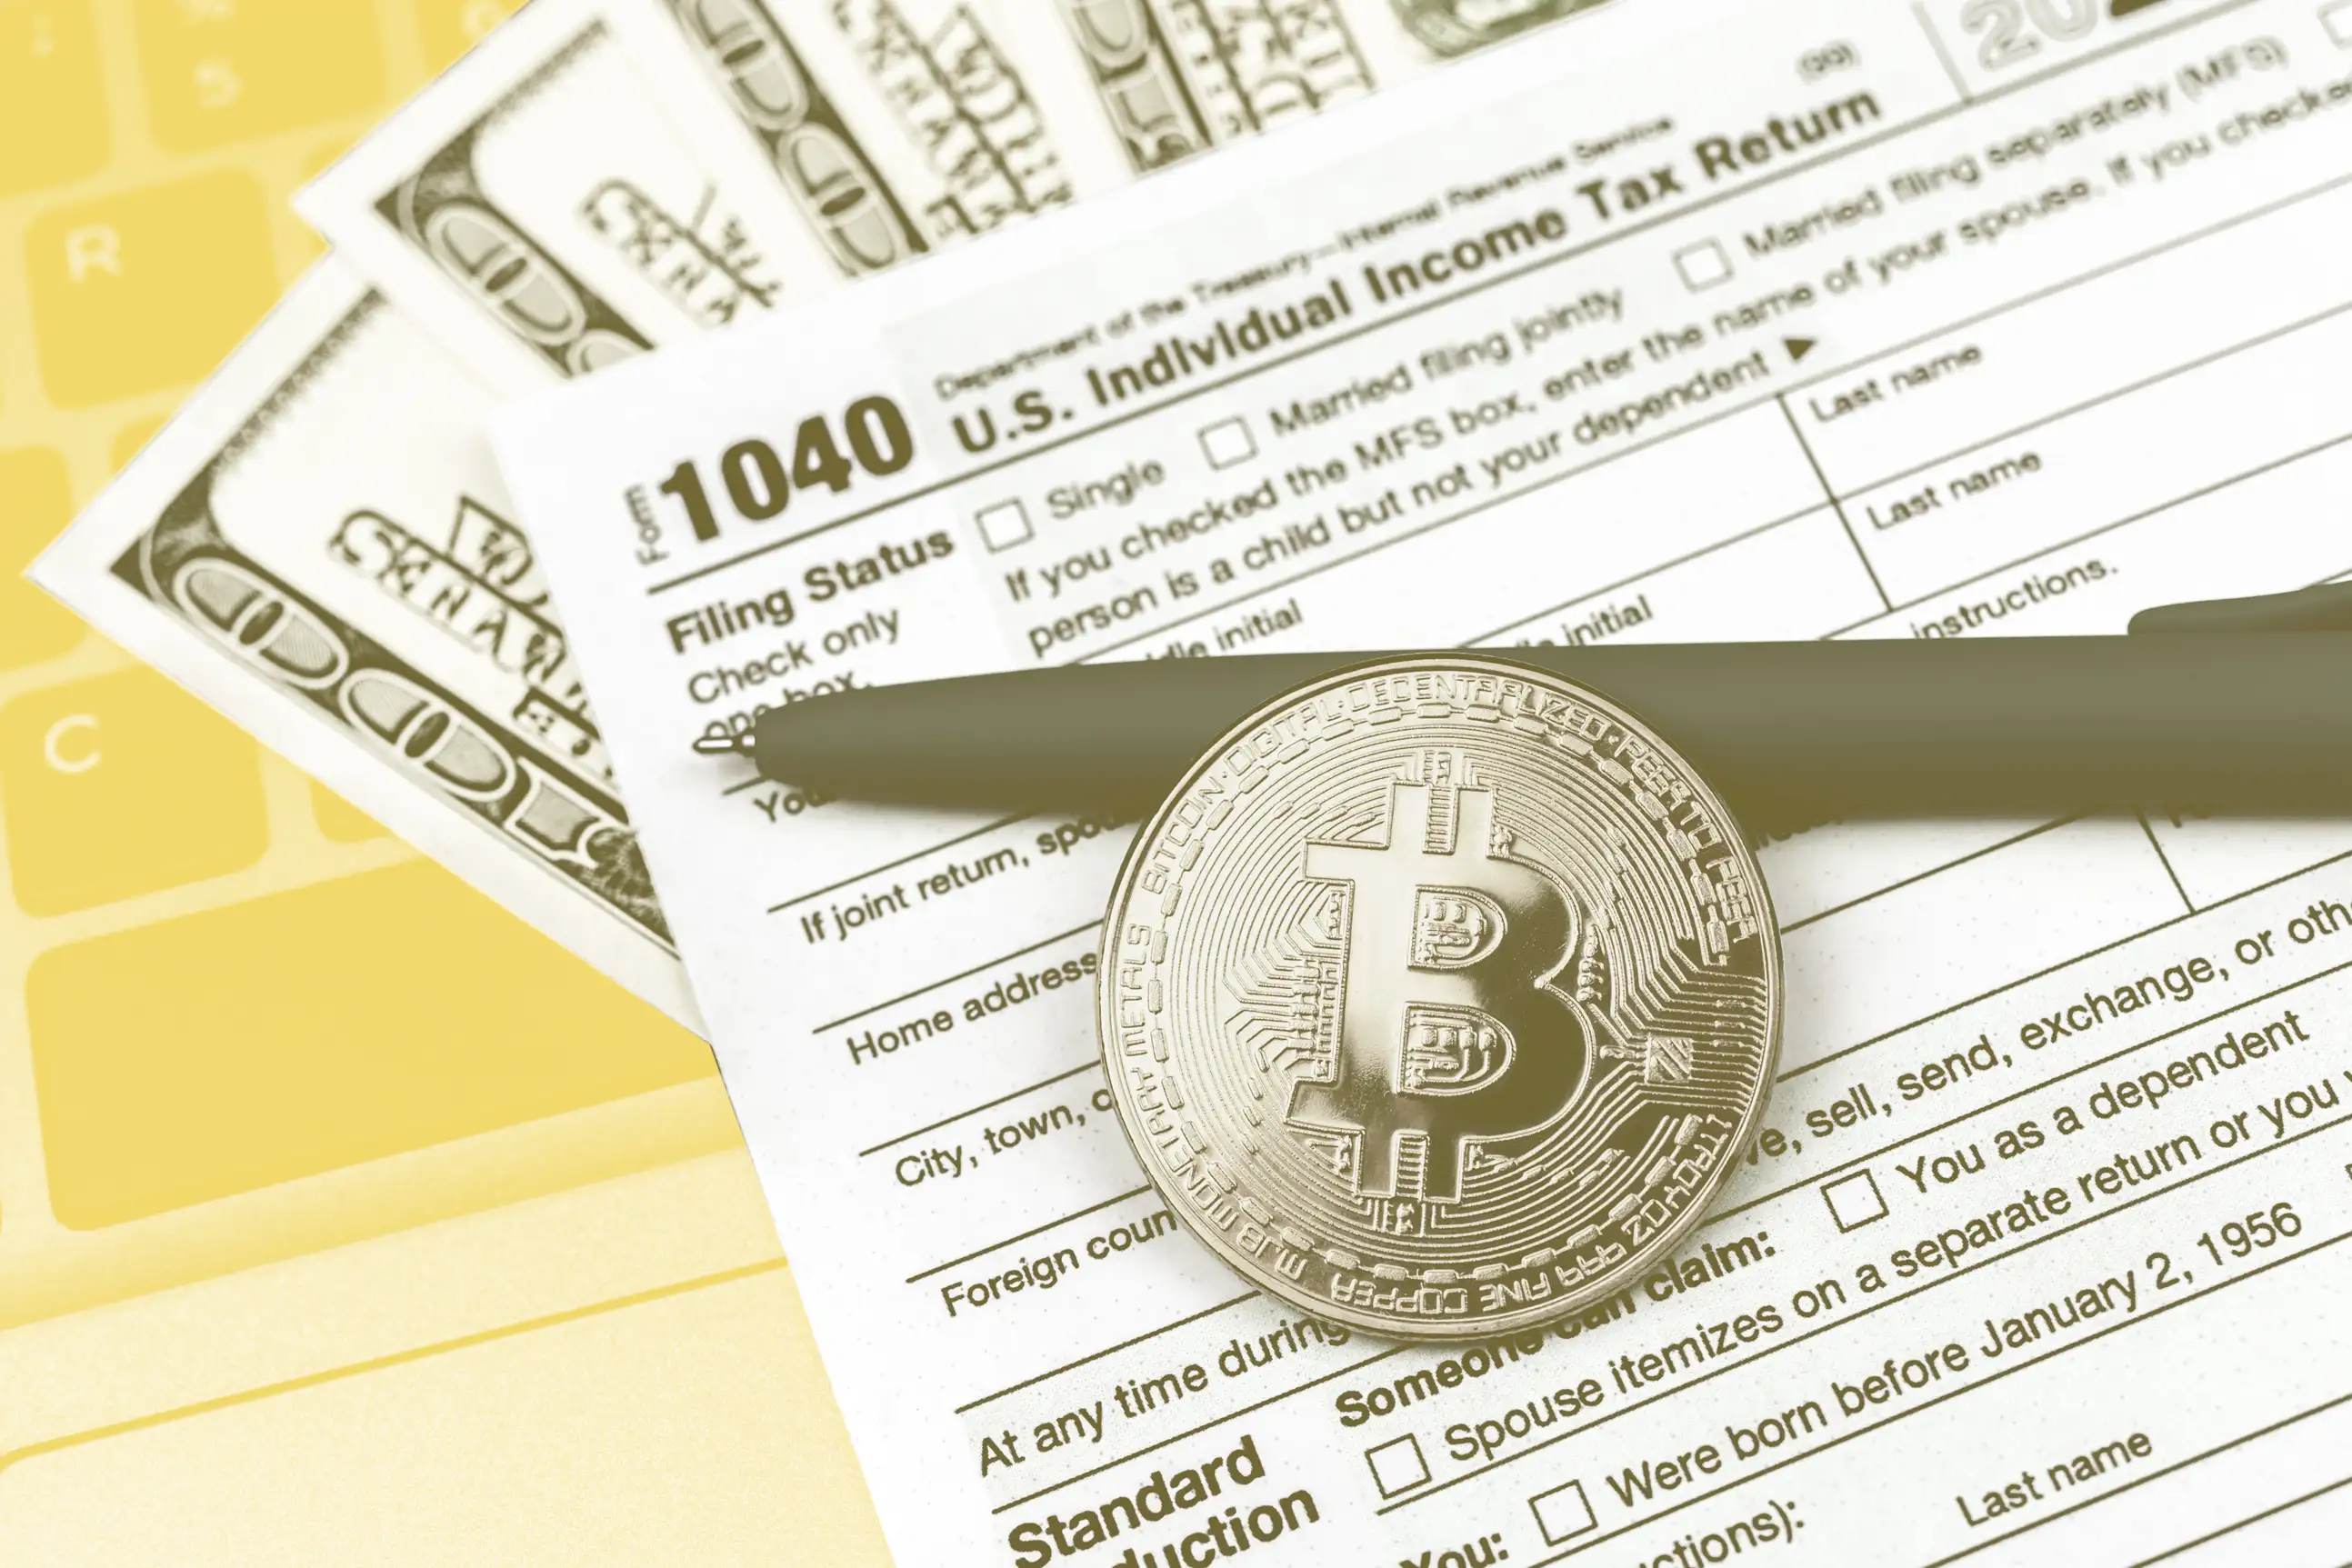 How to Report Bitcoin, Ether, Other Crypto on Your IRS Tax Return in 